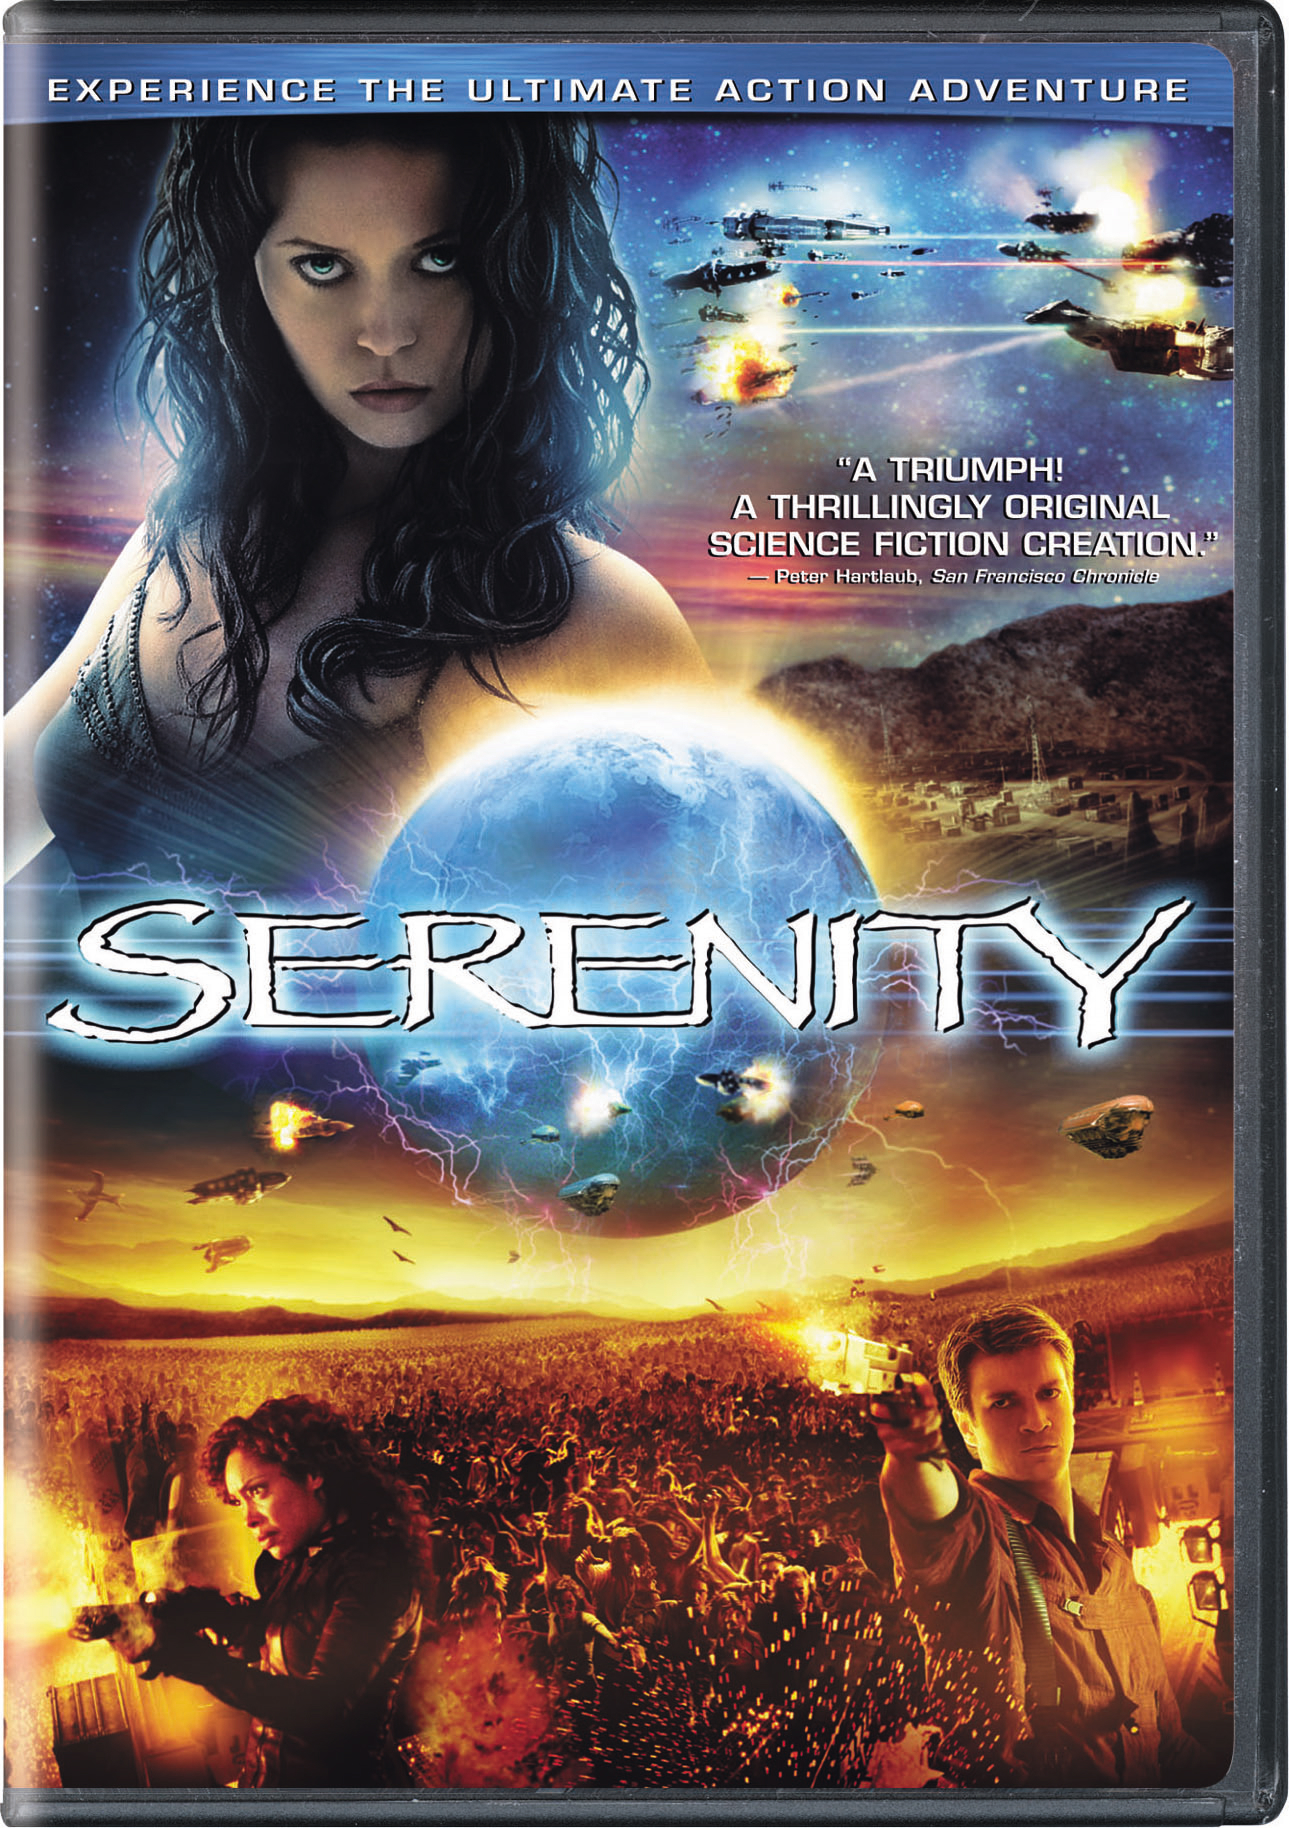 Serenity (Widescreen) - DVD [ 2005 ]  - Sci Fi Movies On DVD - Movies On GRUV